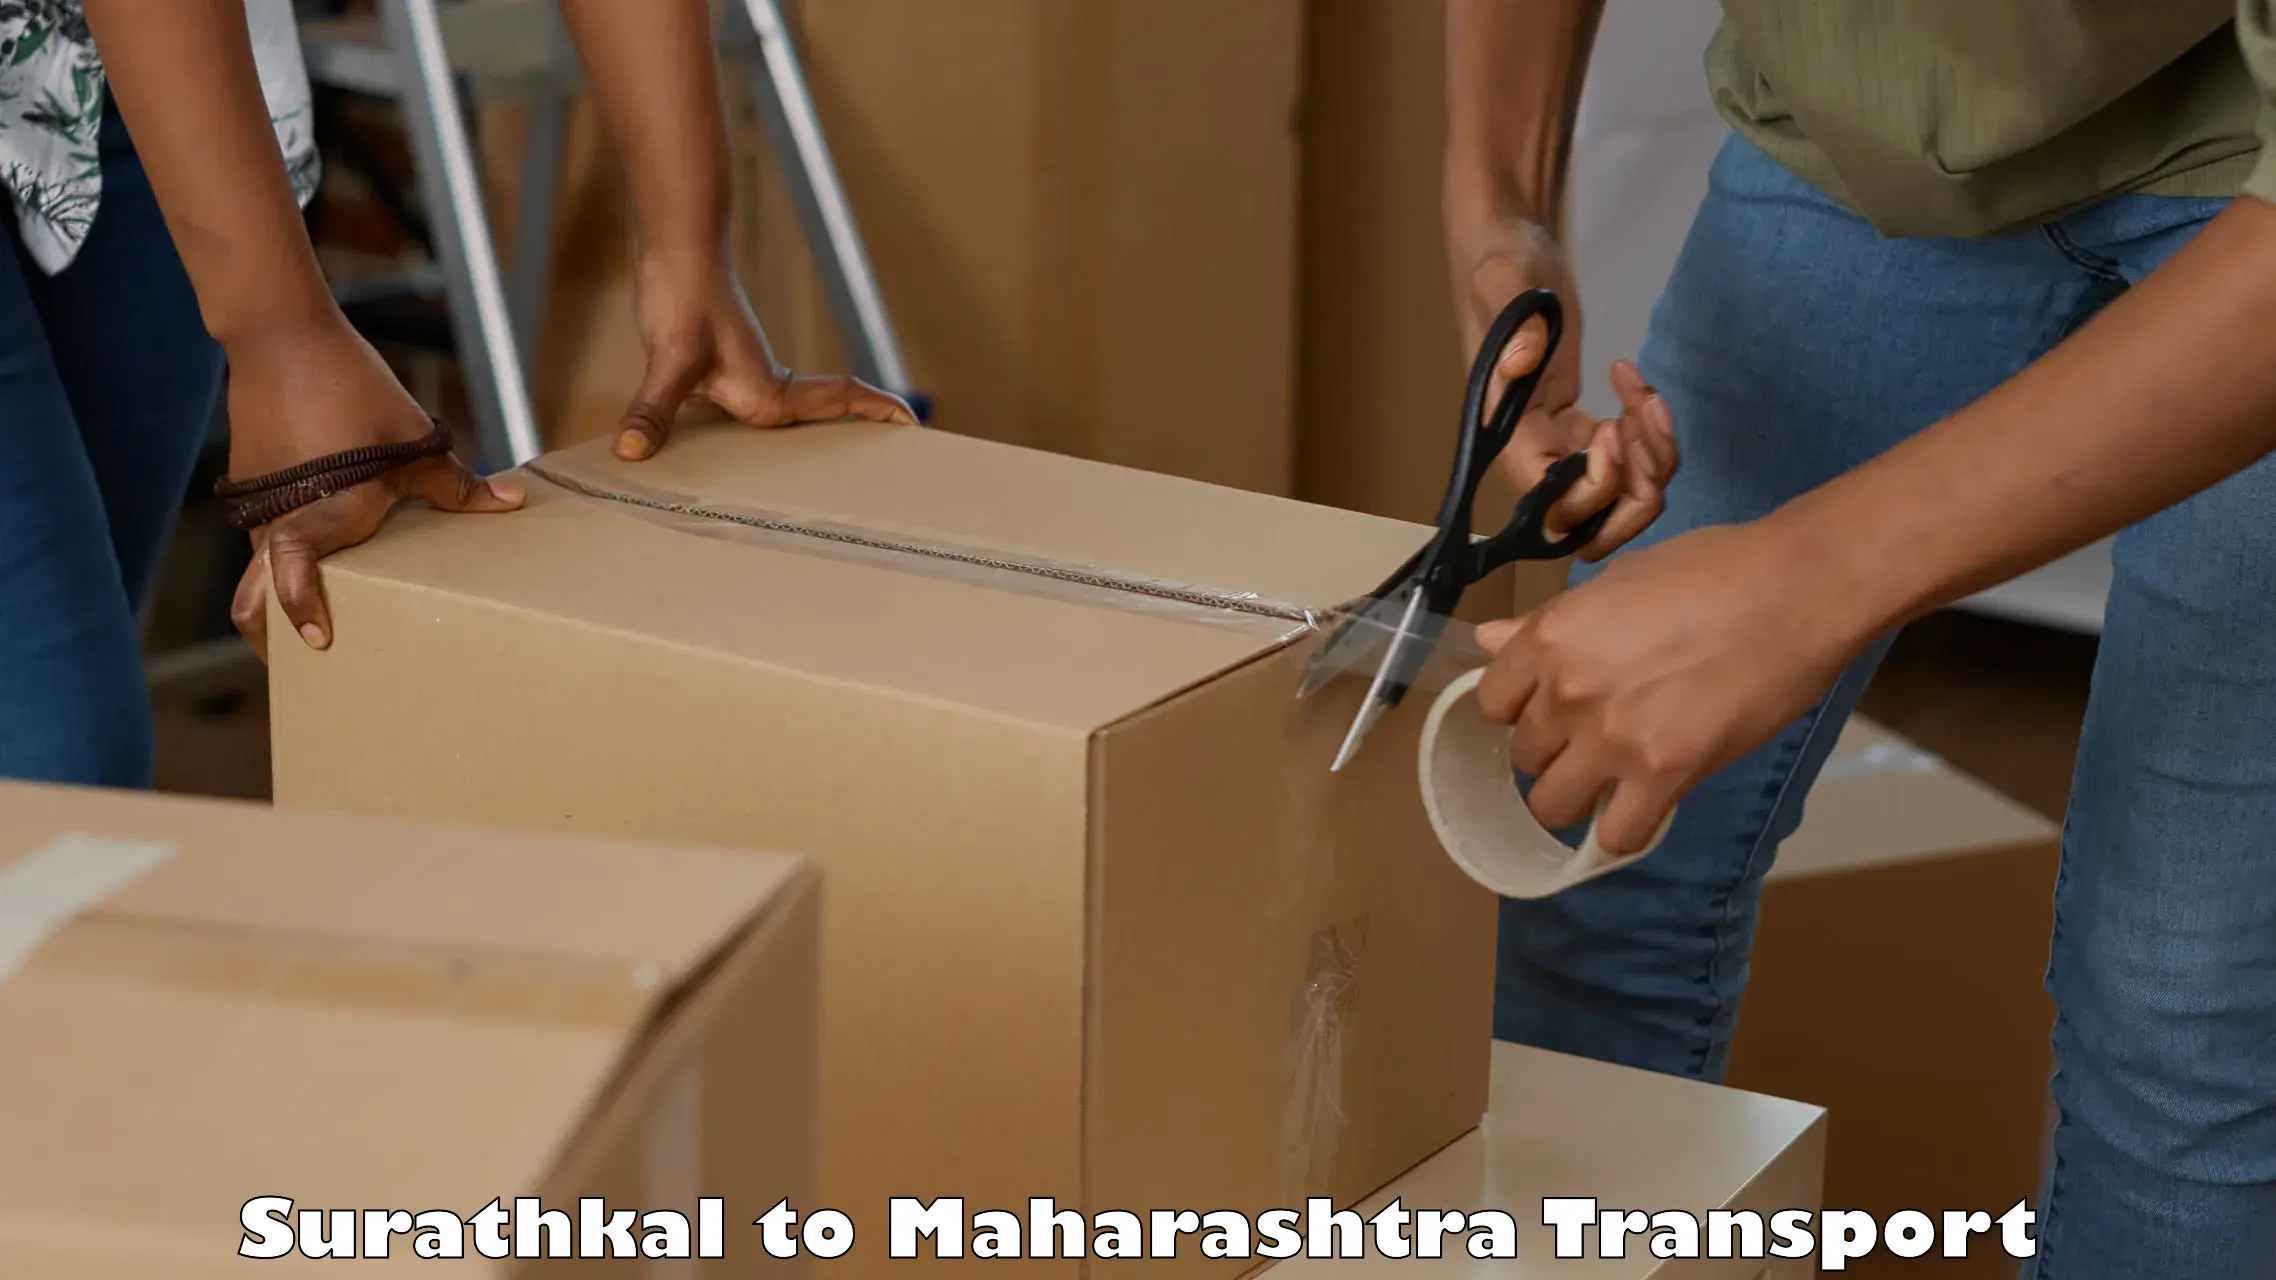 Truck transport companies in India Surathkal to Shirala